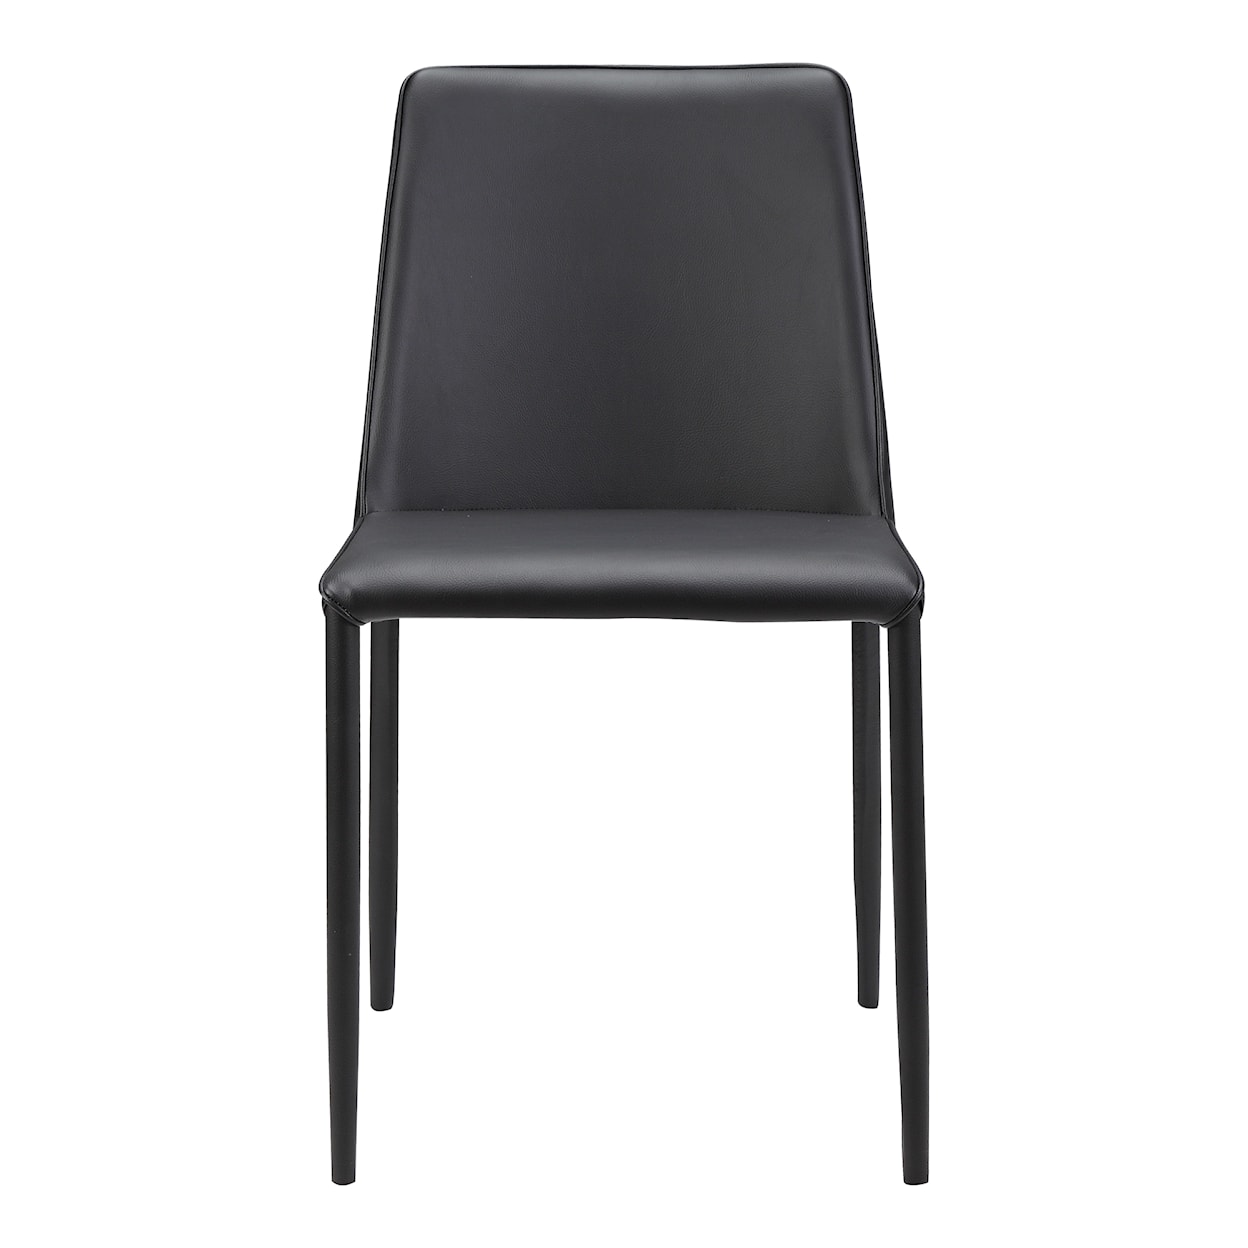 Moe's Home Collection Nora Black Vegan Leather Dining Chair